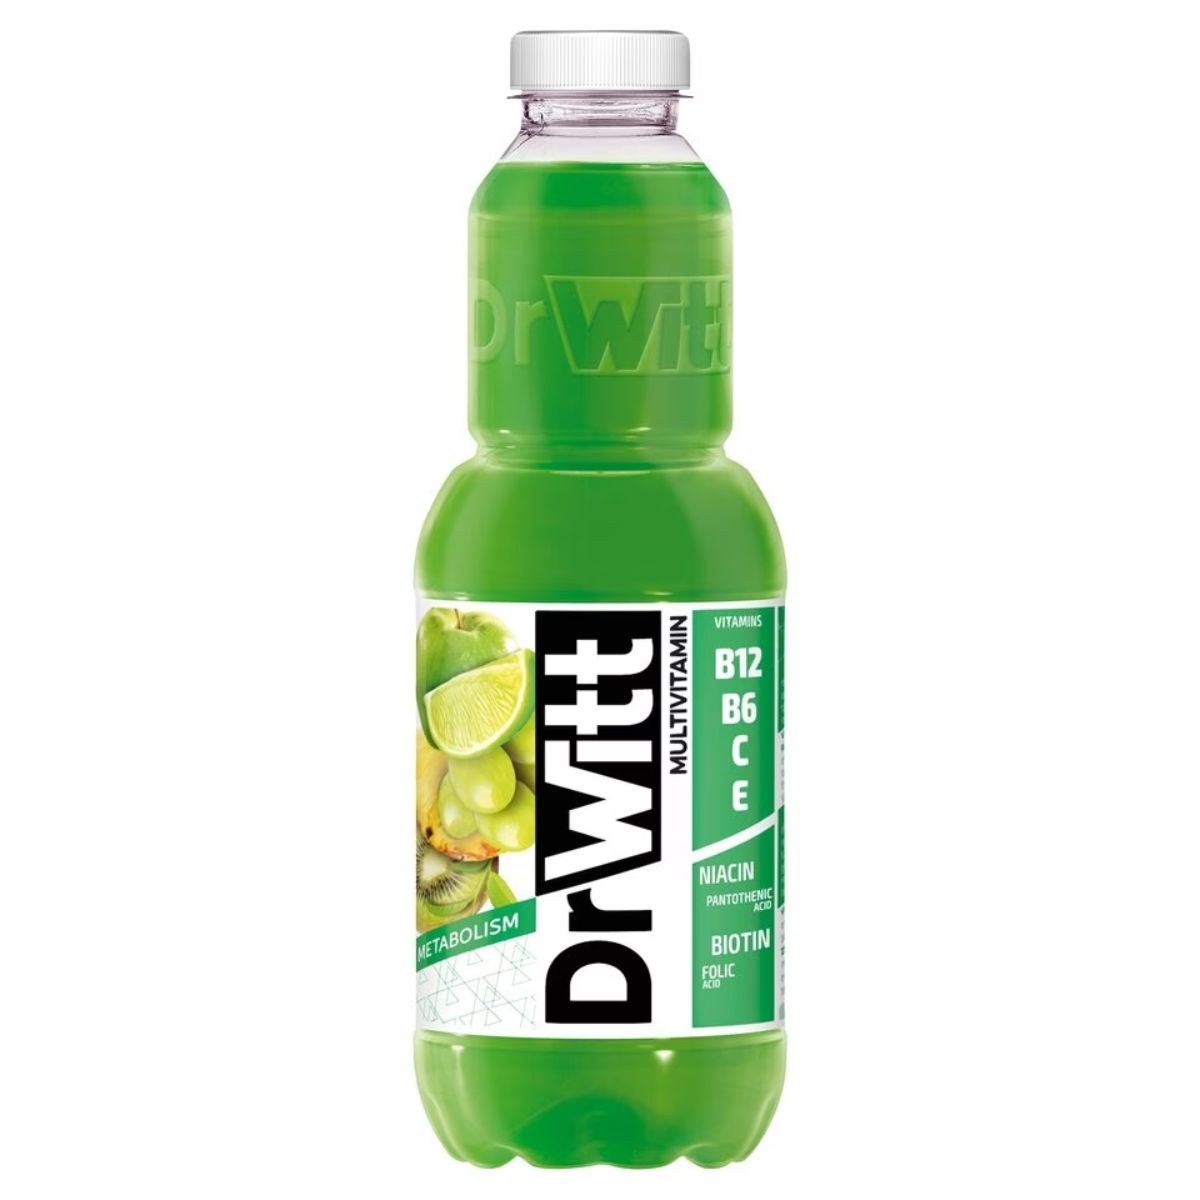 A green bottle of Dr Witt - Green Multivitamin Drink - 1 Litre labeled with information about its content of vitamins B12, B6, C, and E, as well as niacin, pantothenic acid, biotin, and indications supporting metabolism.